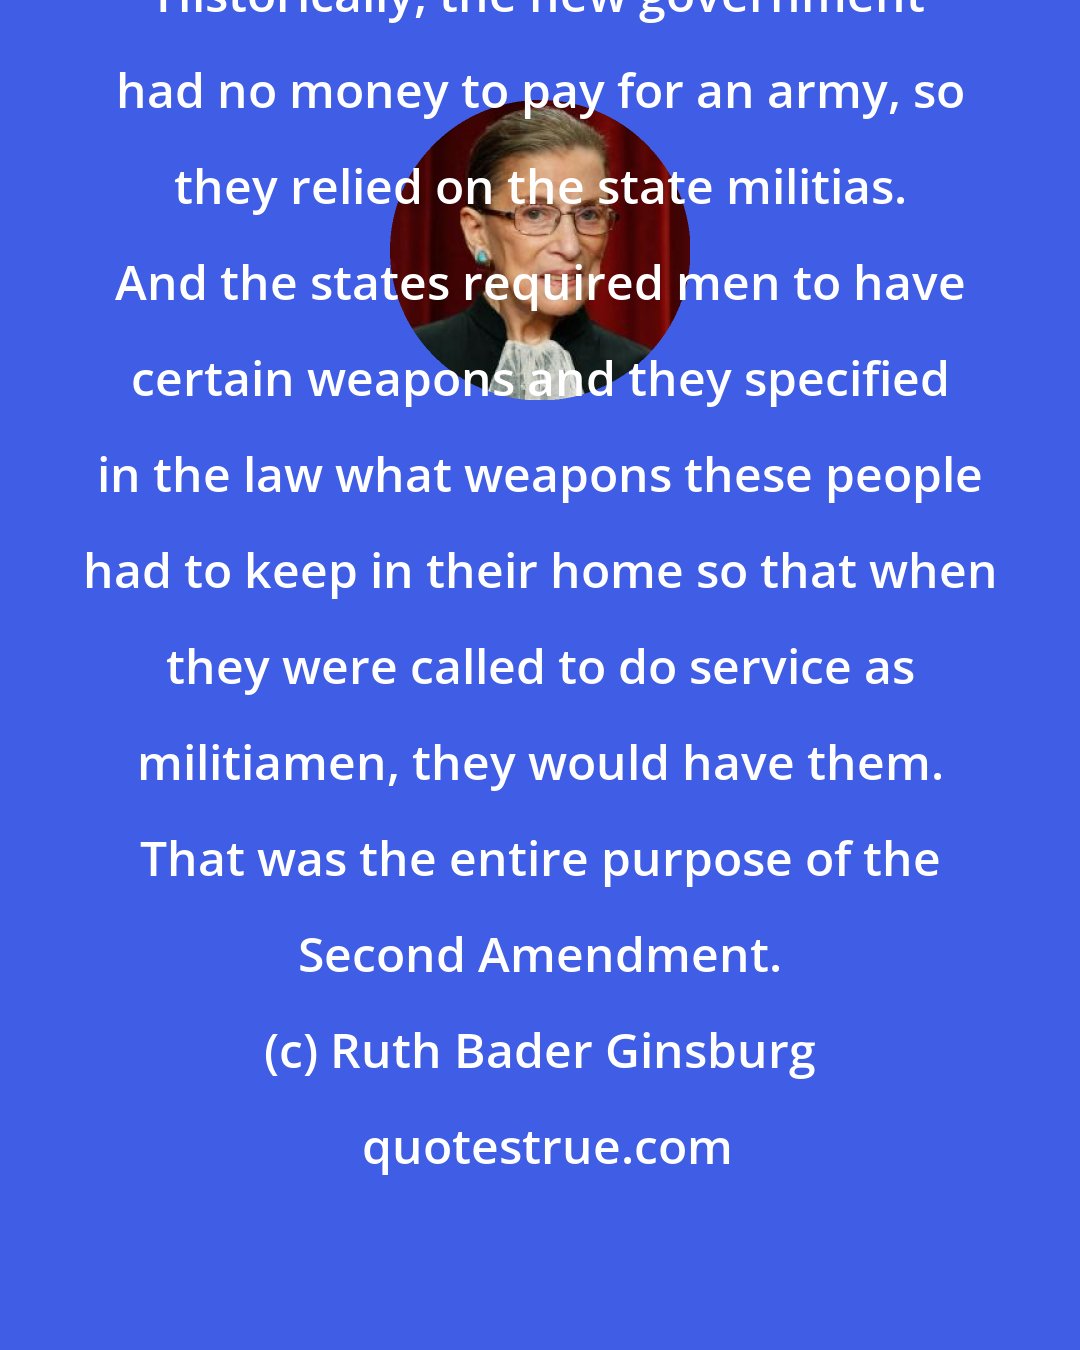 Ruth Bader Ginsburg: Historically, the new government had no money to pay for an army, so they relied on the state militias. And the states required men to have certain weapons and they specified in the law what weapons these people had to keep in their home so that when they were called to do service as militiamen, they would have them. That was the entire purpose of the Second Amendment.